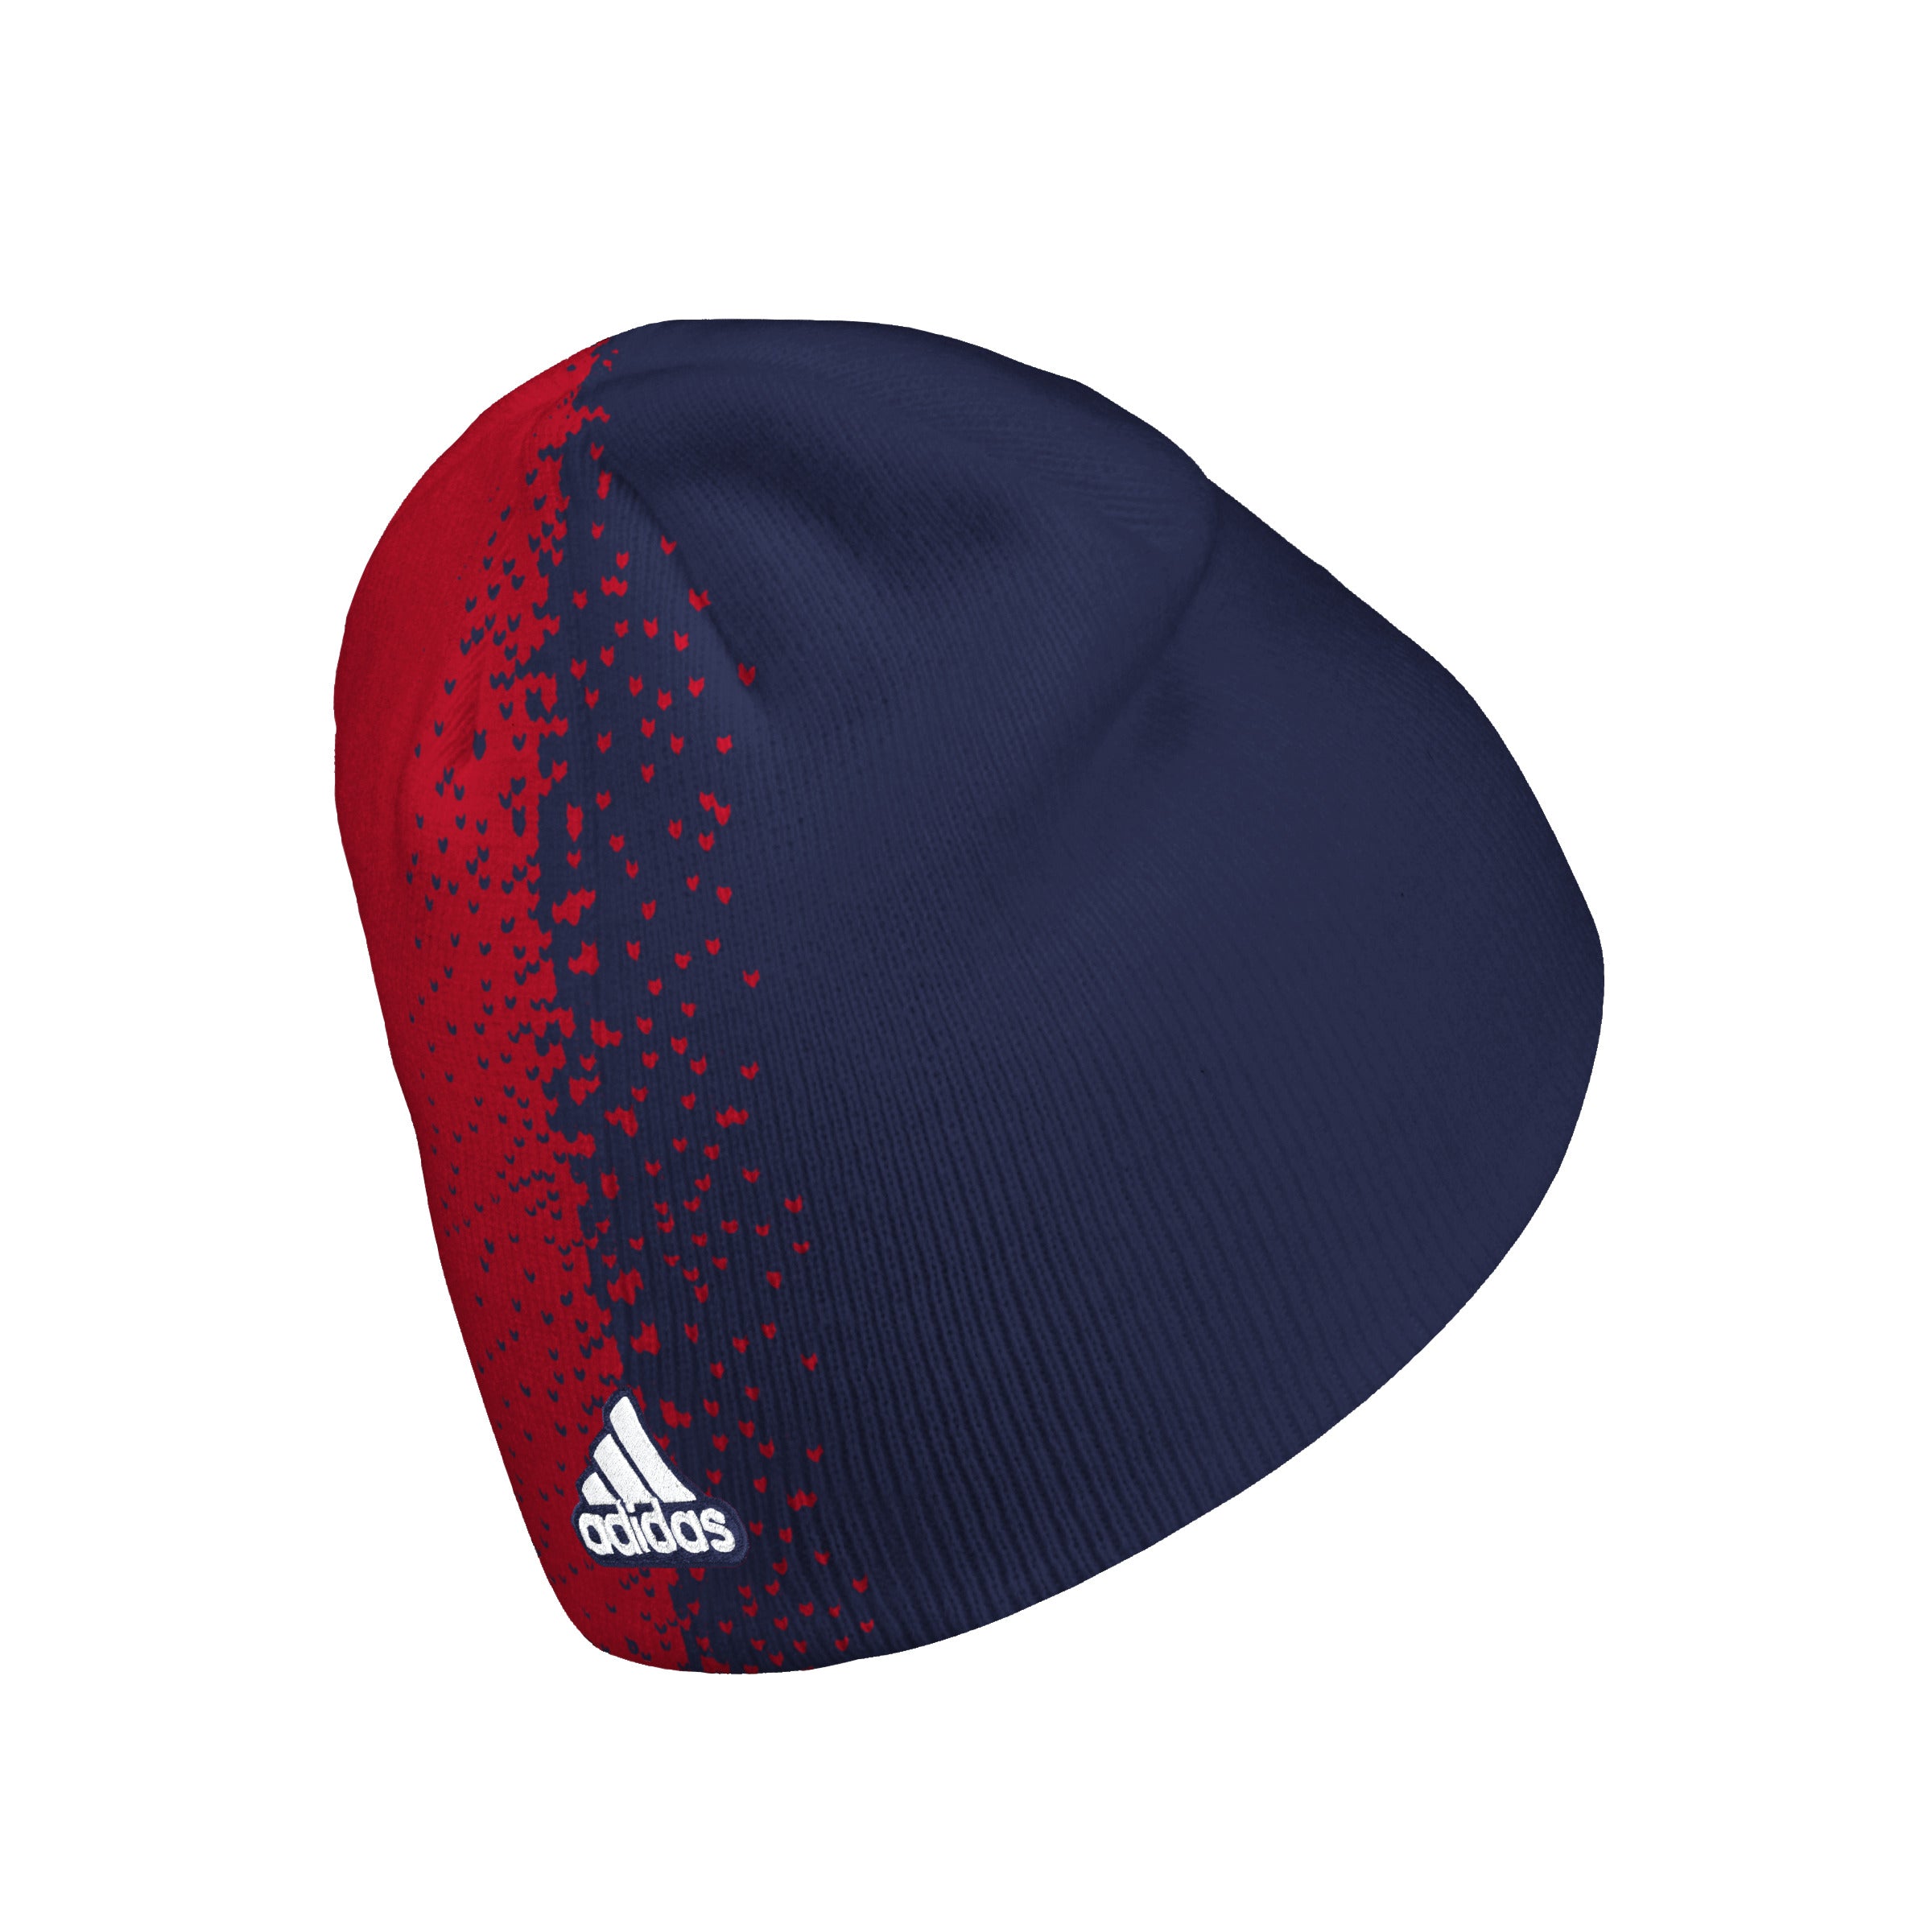 Florida Panthers adidas Half and Half Speckled Cuffless Beanie - Red/Blue